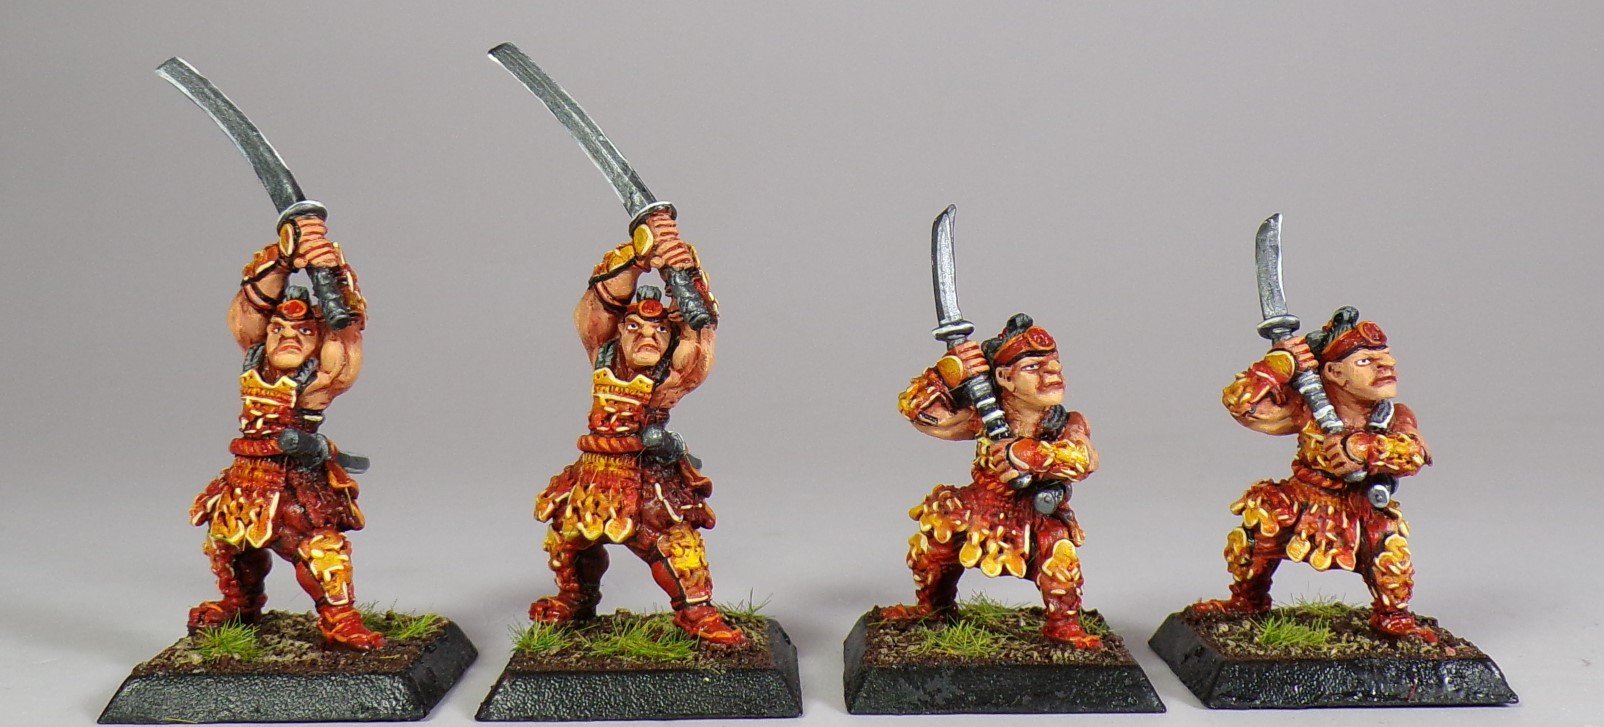 L5R Legend of the Five Rings Miniature Painting Service Paintedfigs (40).jpg